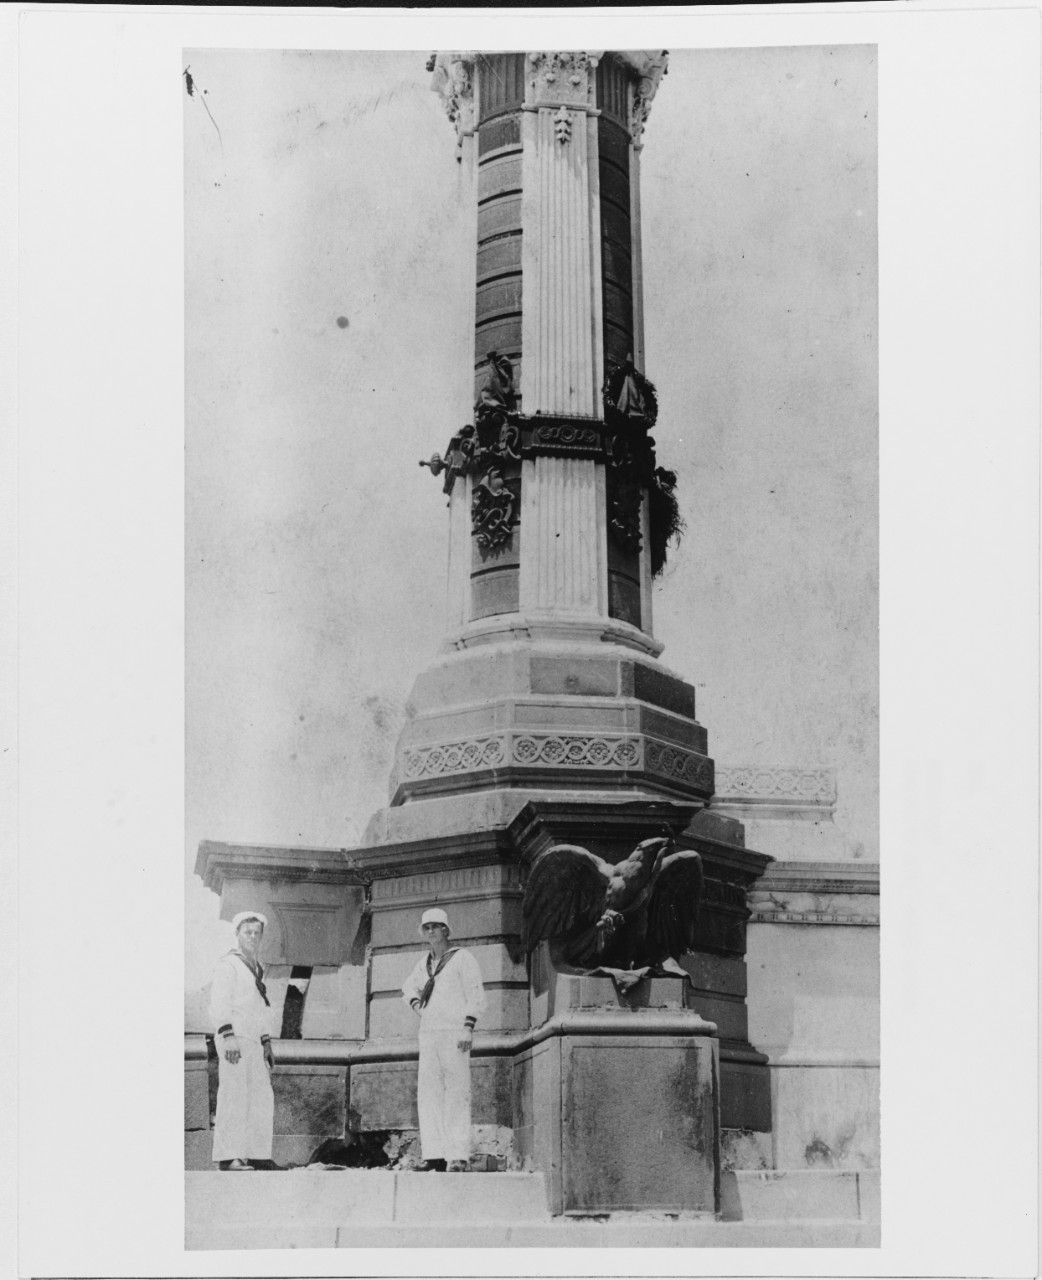 Sailors stand next to shell hit from Navy gun on a Monument in Vera Cruz, 1913